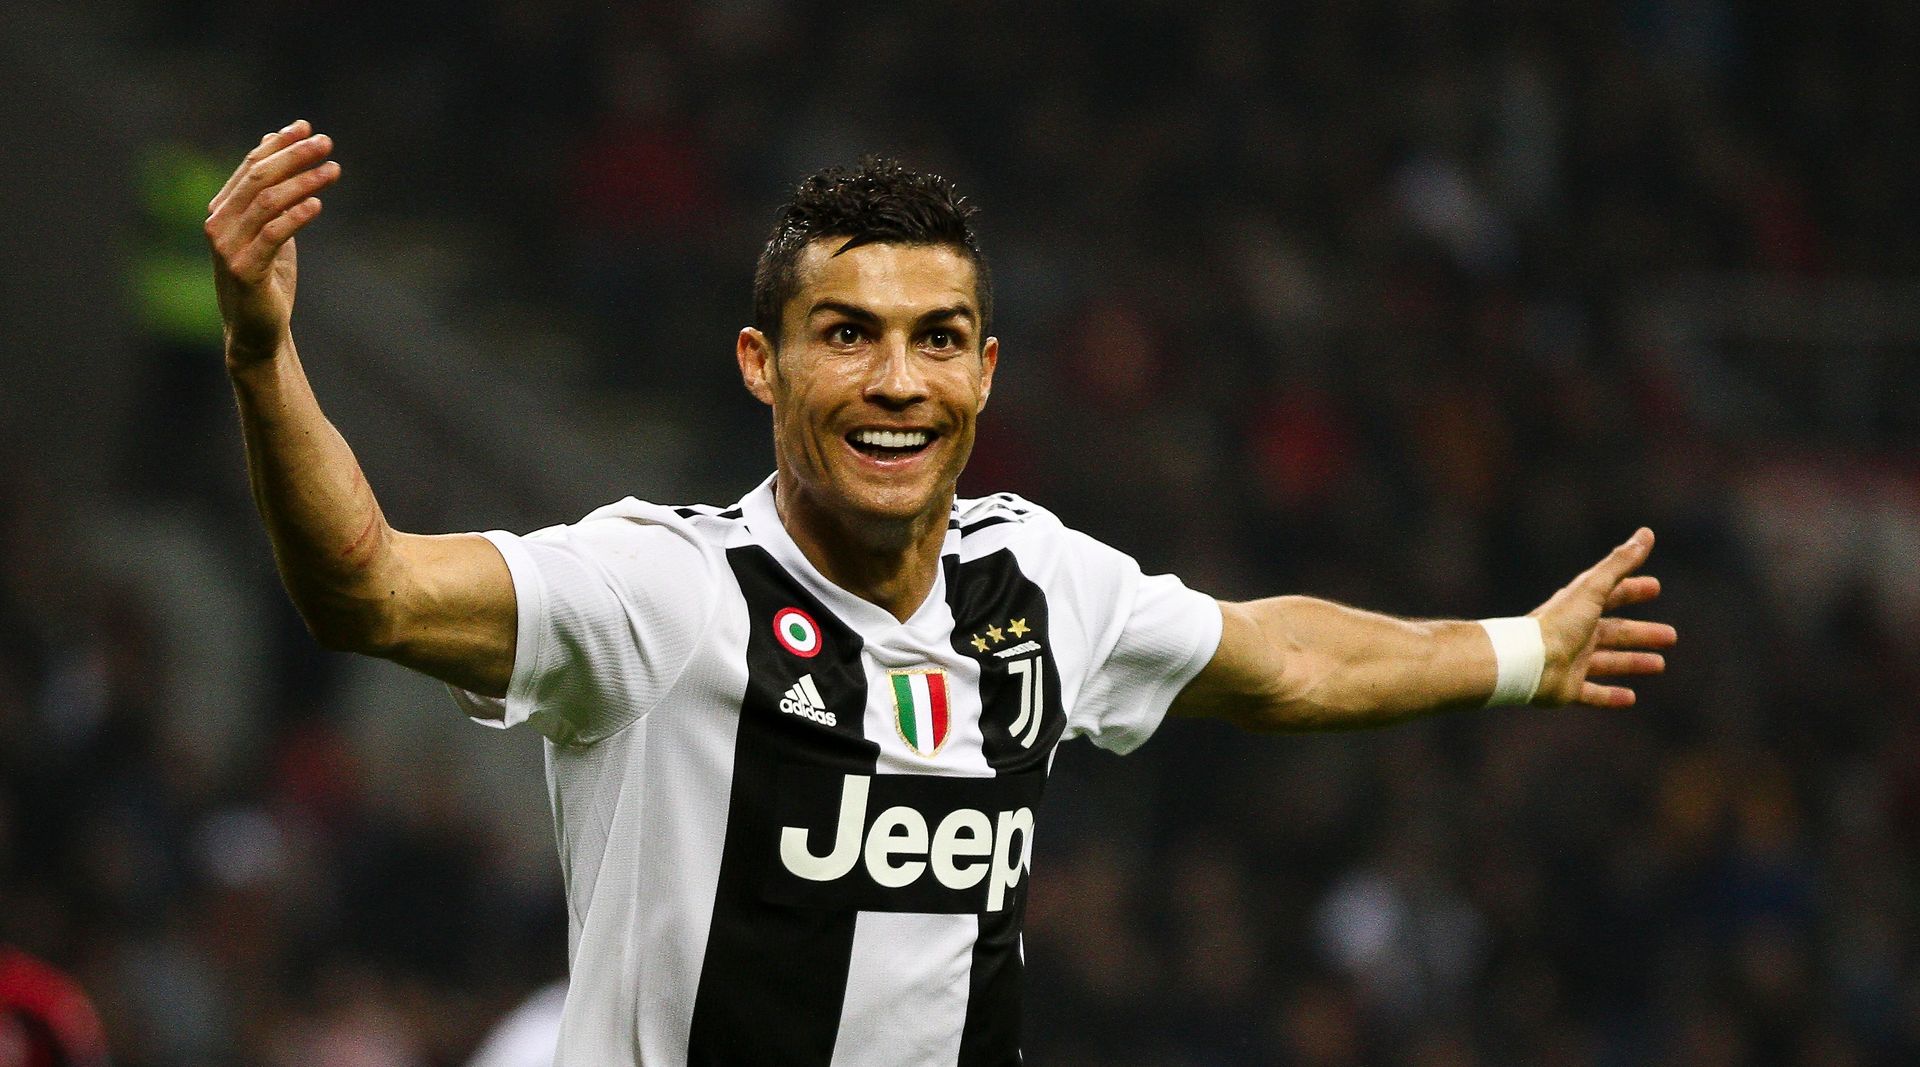 <p>                     Cristiano Ronaldo only moved to Serie A in the summer of 2018, but his record for Juventus was too noteworthy for him <em>not</em> to make the list.                   </p>                                      <p>                     Named the league’s Footballer of the Year at the end of his first season – which saw him win the Scudetto – the multiple Ballon d’Or winner bagged 52 league goals in his first two campaigns with the Bianconeri alone.                   </p>